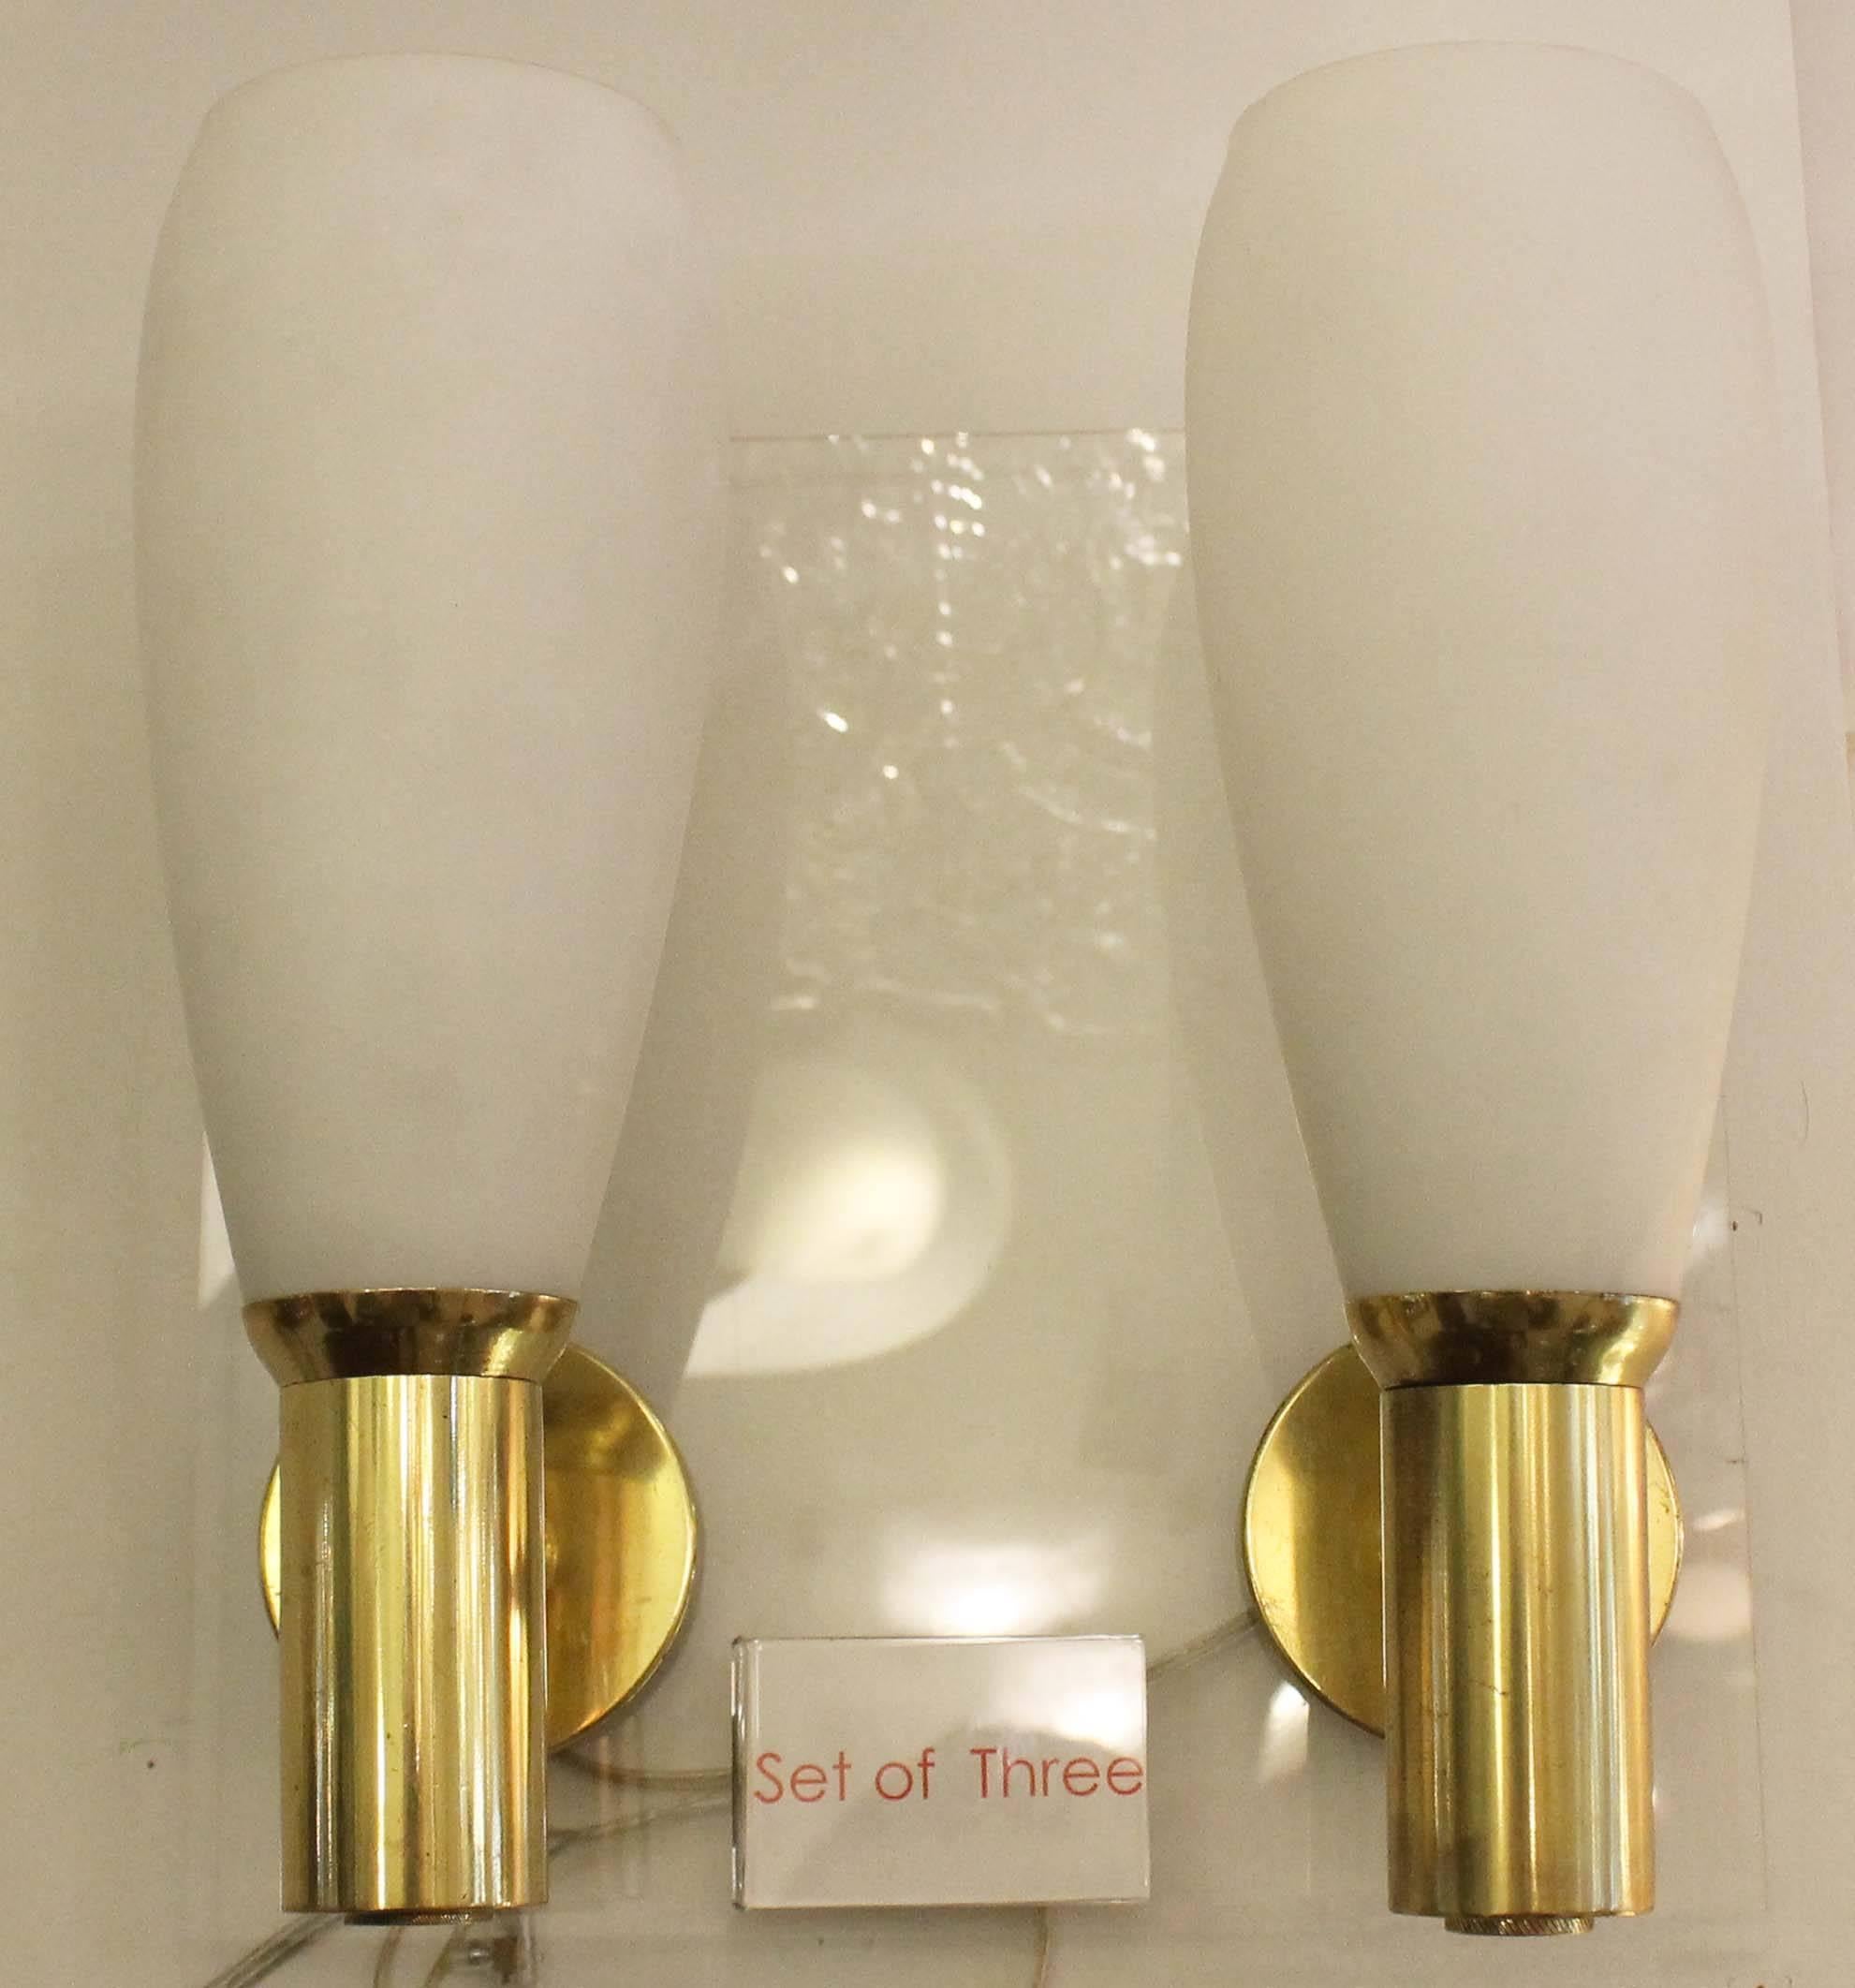 Set of three 1940s-early 1950s sconces featuring a brass wall mount sustaining a white sanded glass shade. The inclination of the front section can be adjusted. They can also be sold as a single or a pair.